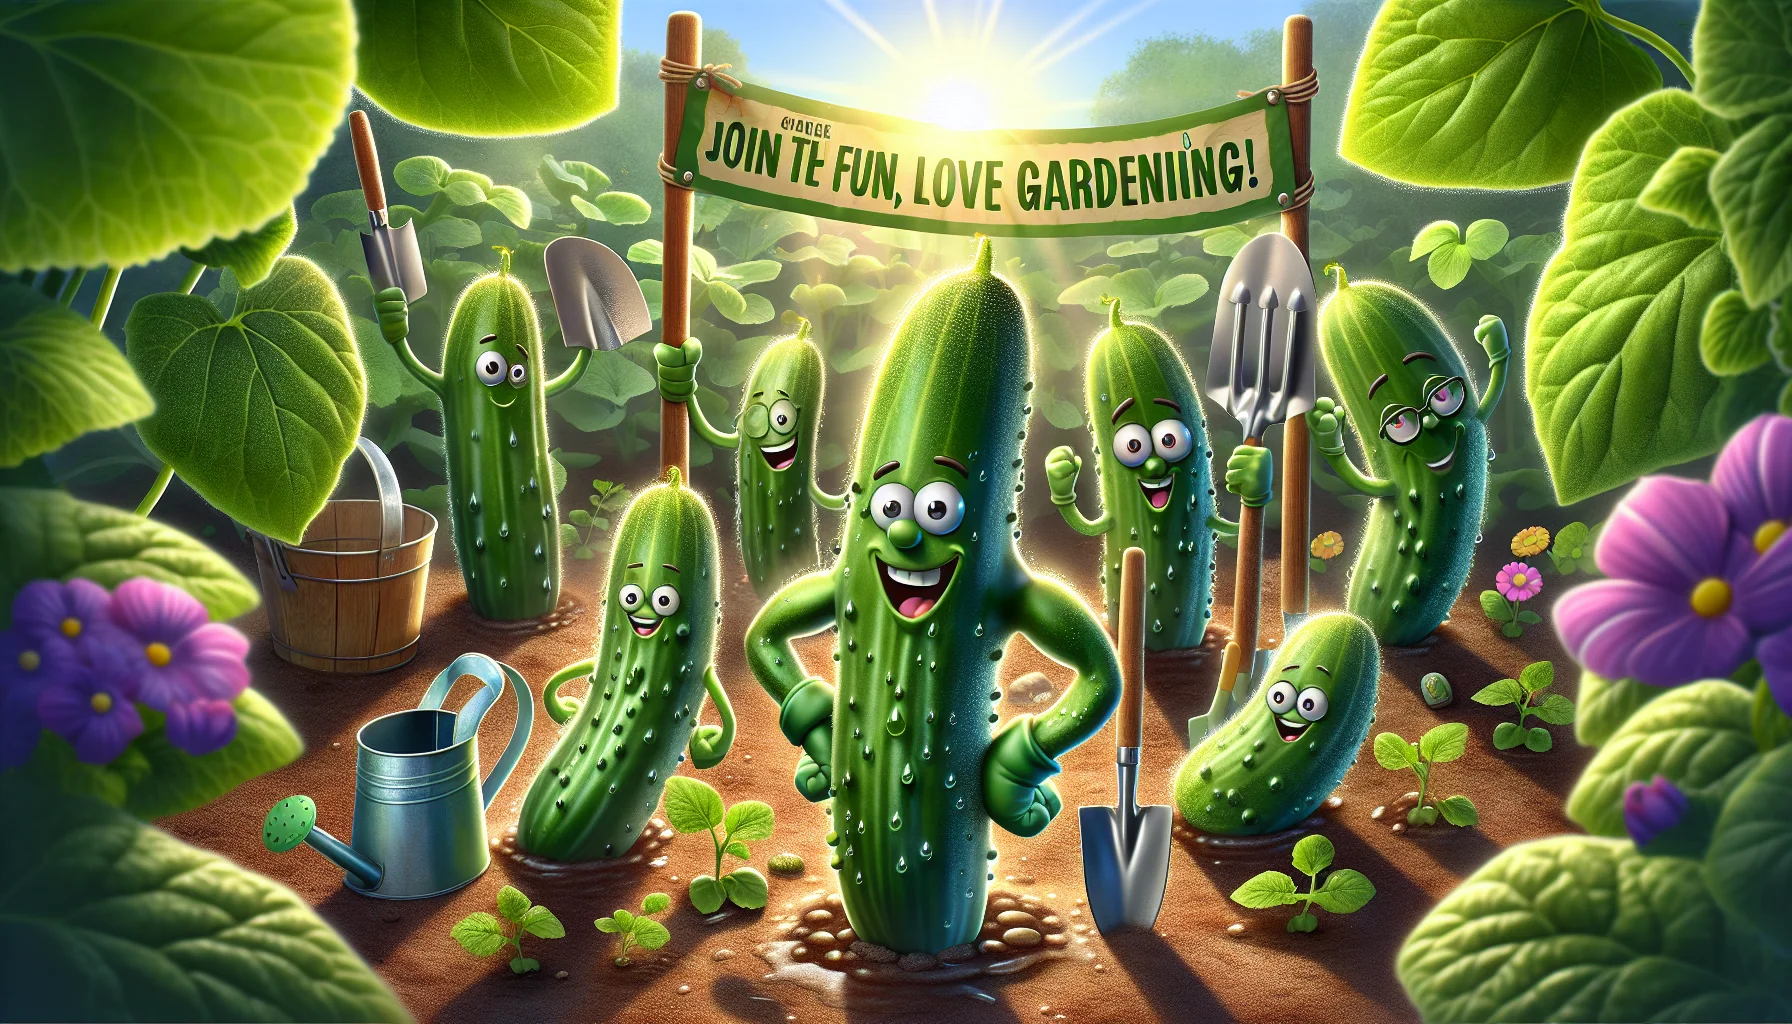 Imagine a whimsical scenario in a garden. Gleaming under the rising sun, freshly watered English cucumbers are growing lushly amidst thick, green leaves that glisten with dew drops. Suddenly, they sprout cartoonish, expressive eyes and flex their muscles, showcasing their impressive growth. In the backdrop, joyous garden tools - a shovel, a watering can, a pair of gardening gloves - are animated and cheering the cucumbers on. They are holding a banner that reads 'Join the Fun, Love Gardening!'. The image portrays the fun and rewarding aspect of gardening in a light-hearted, appealing manner.